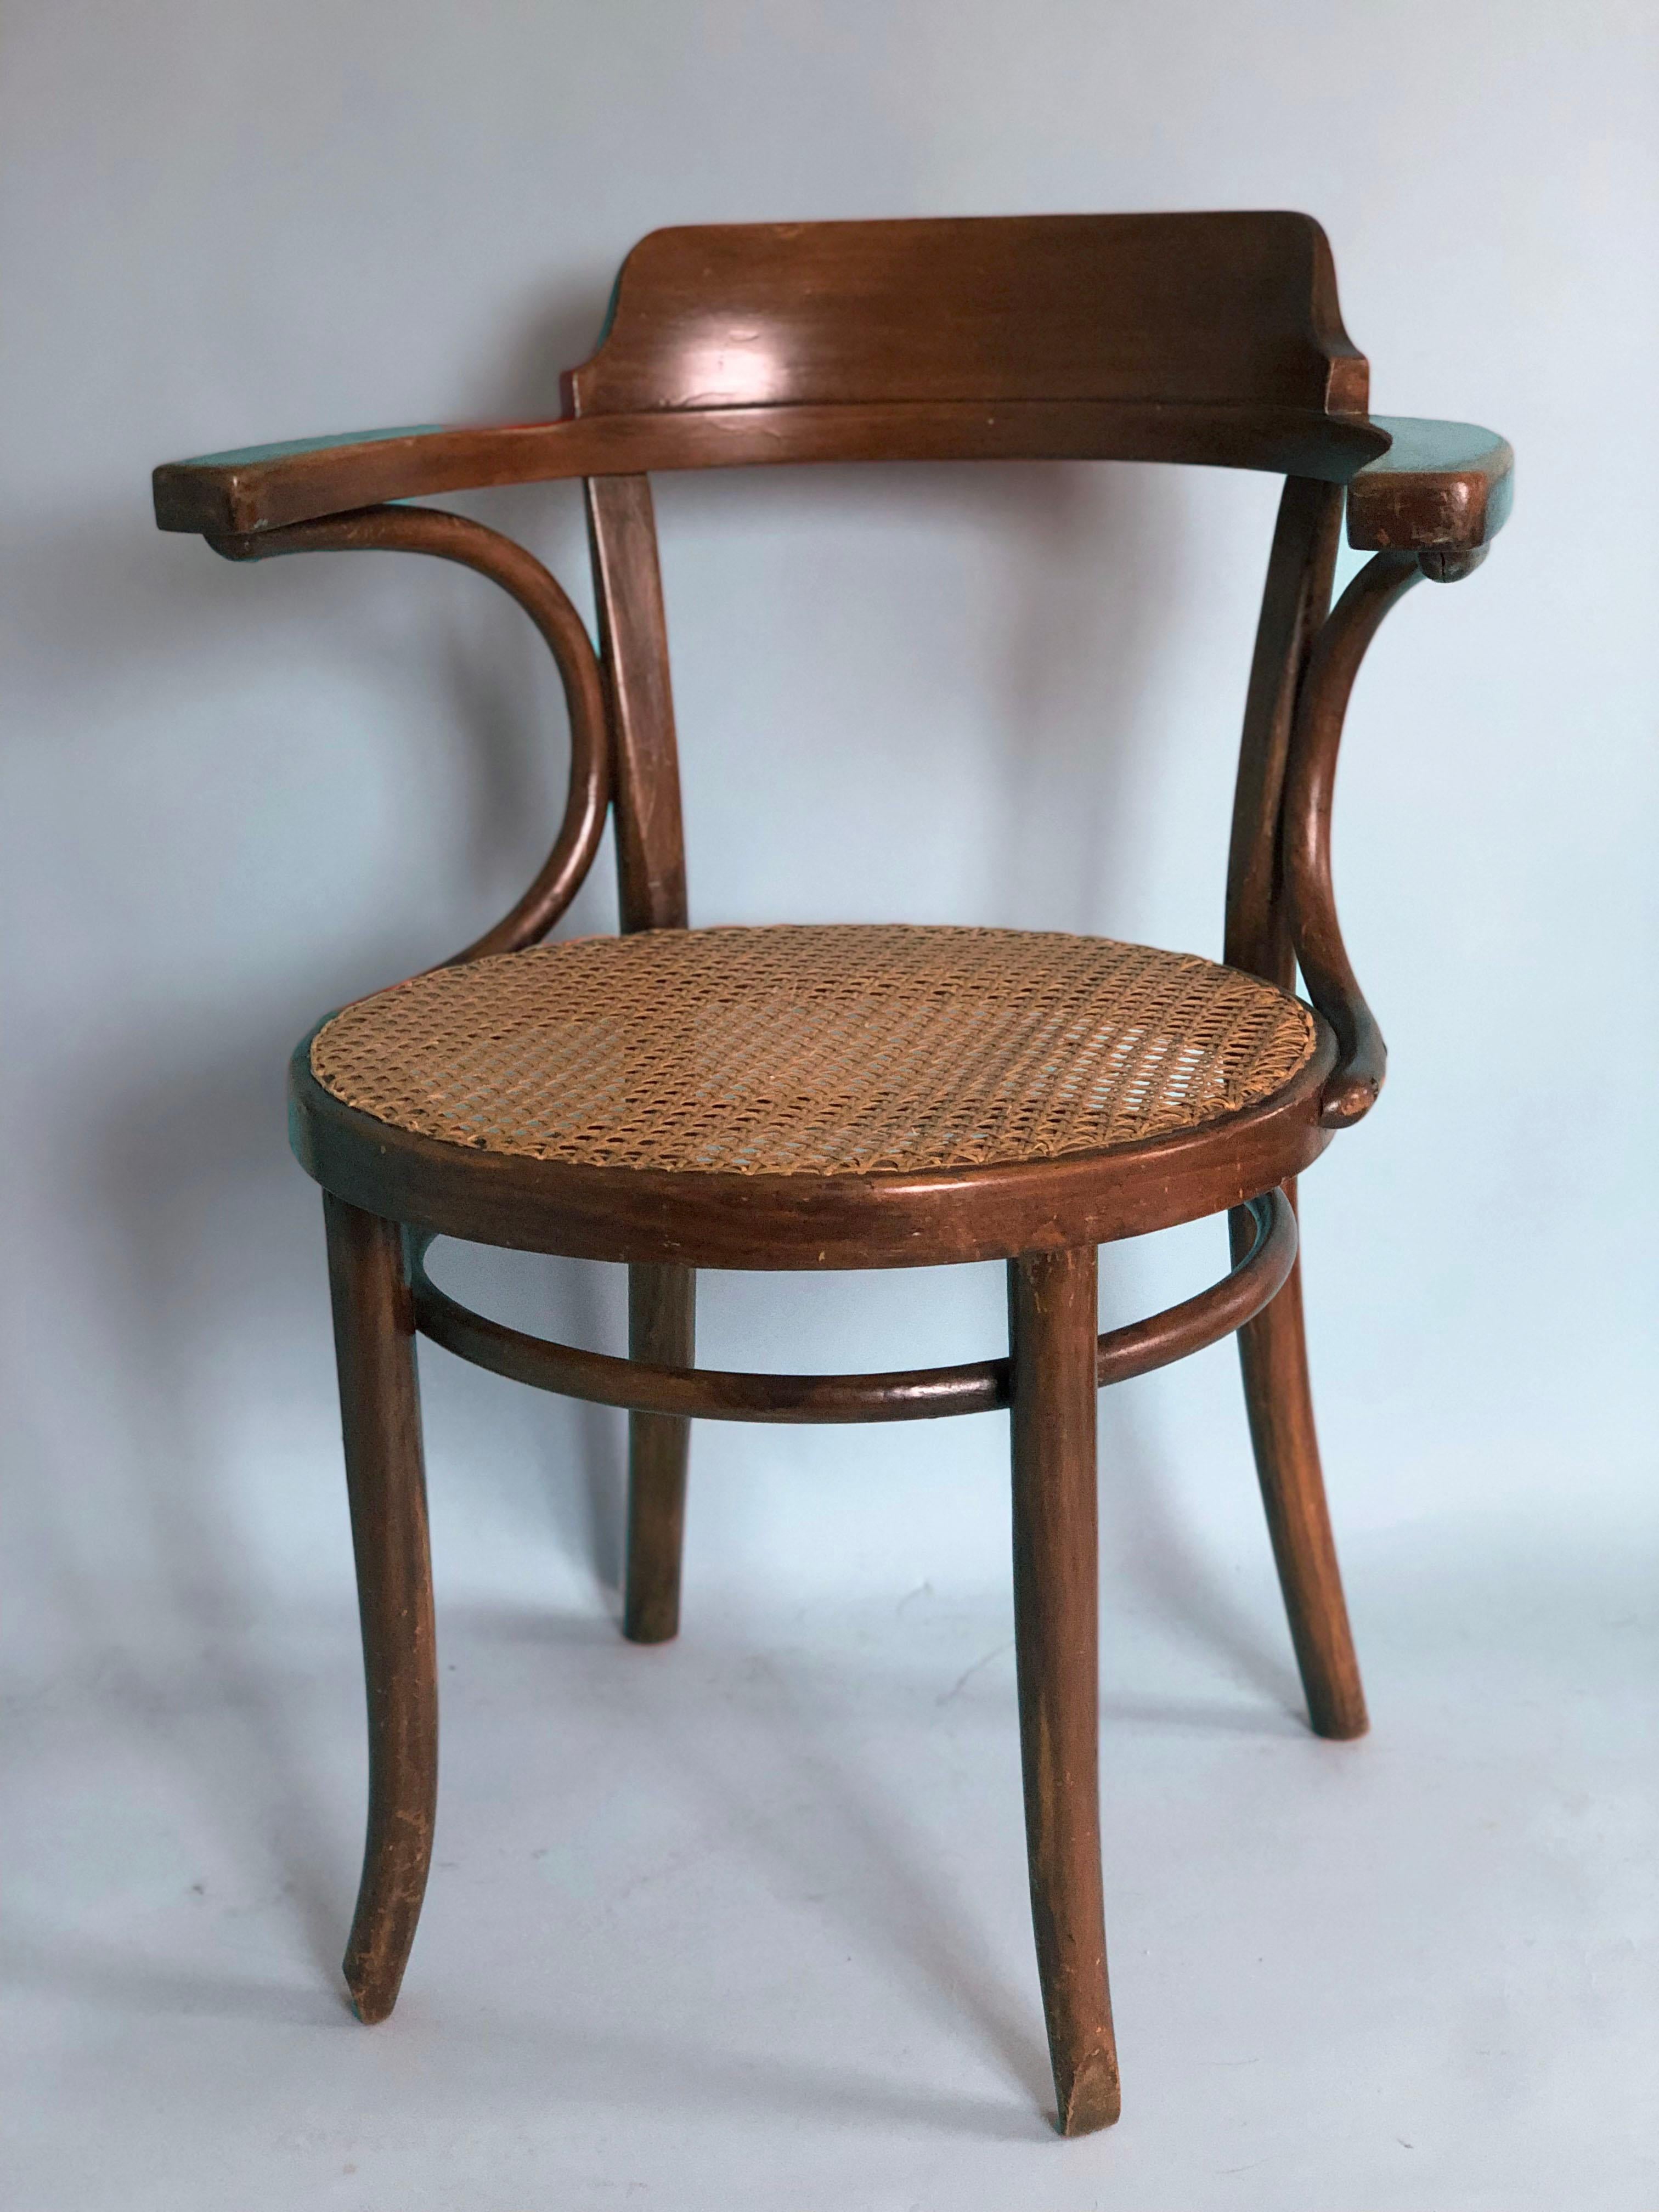 A pair of beautifully shaped bentwood chairs with cane from Thonet. Designed at the end of the 19th century. These 2 chairs were produced in the 1950s in the Thonet factory 